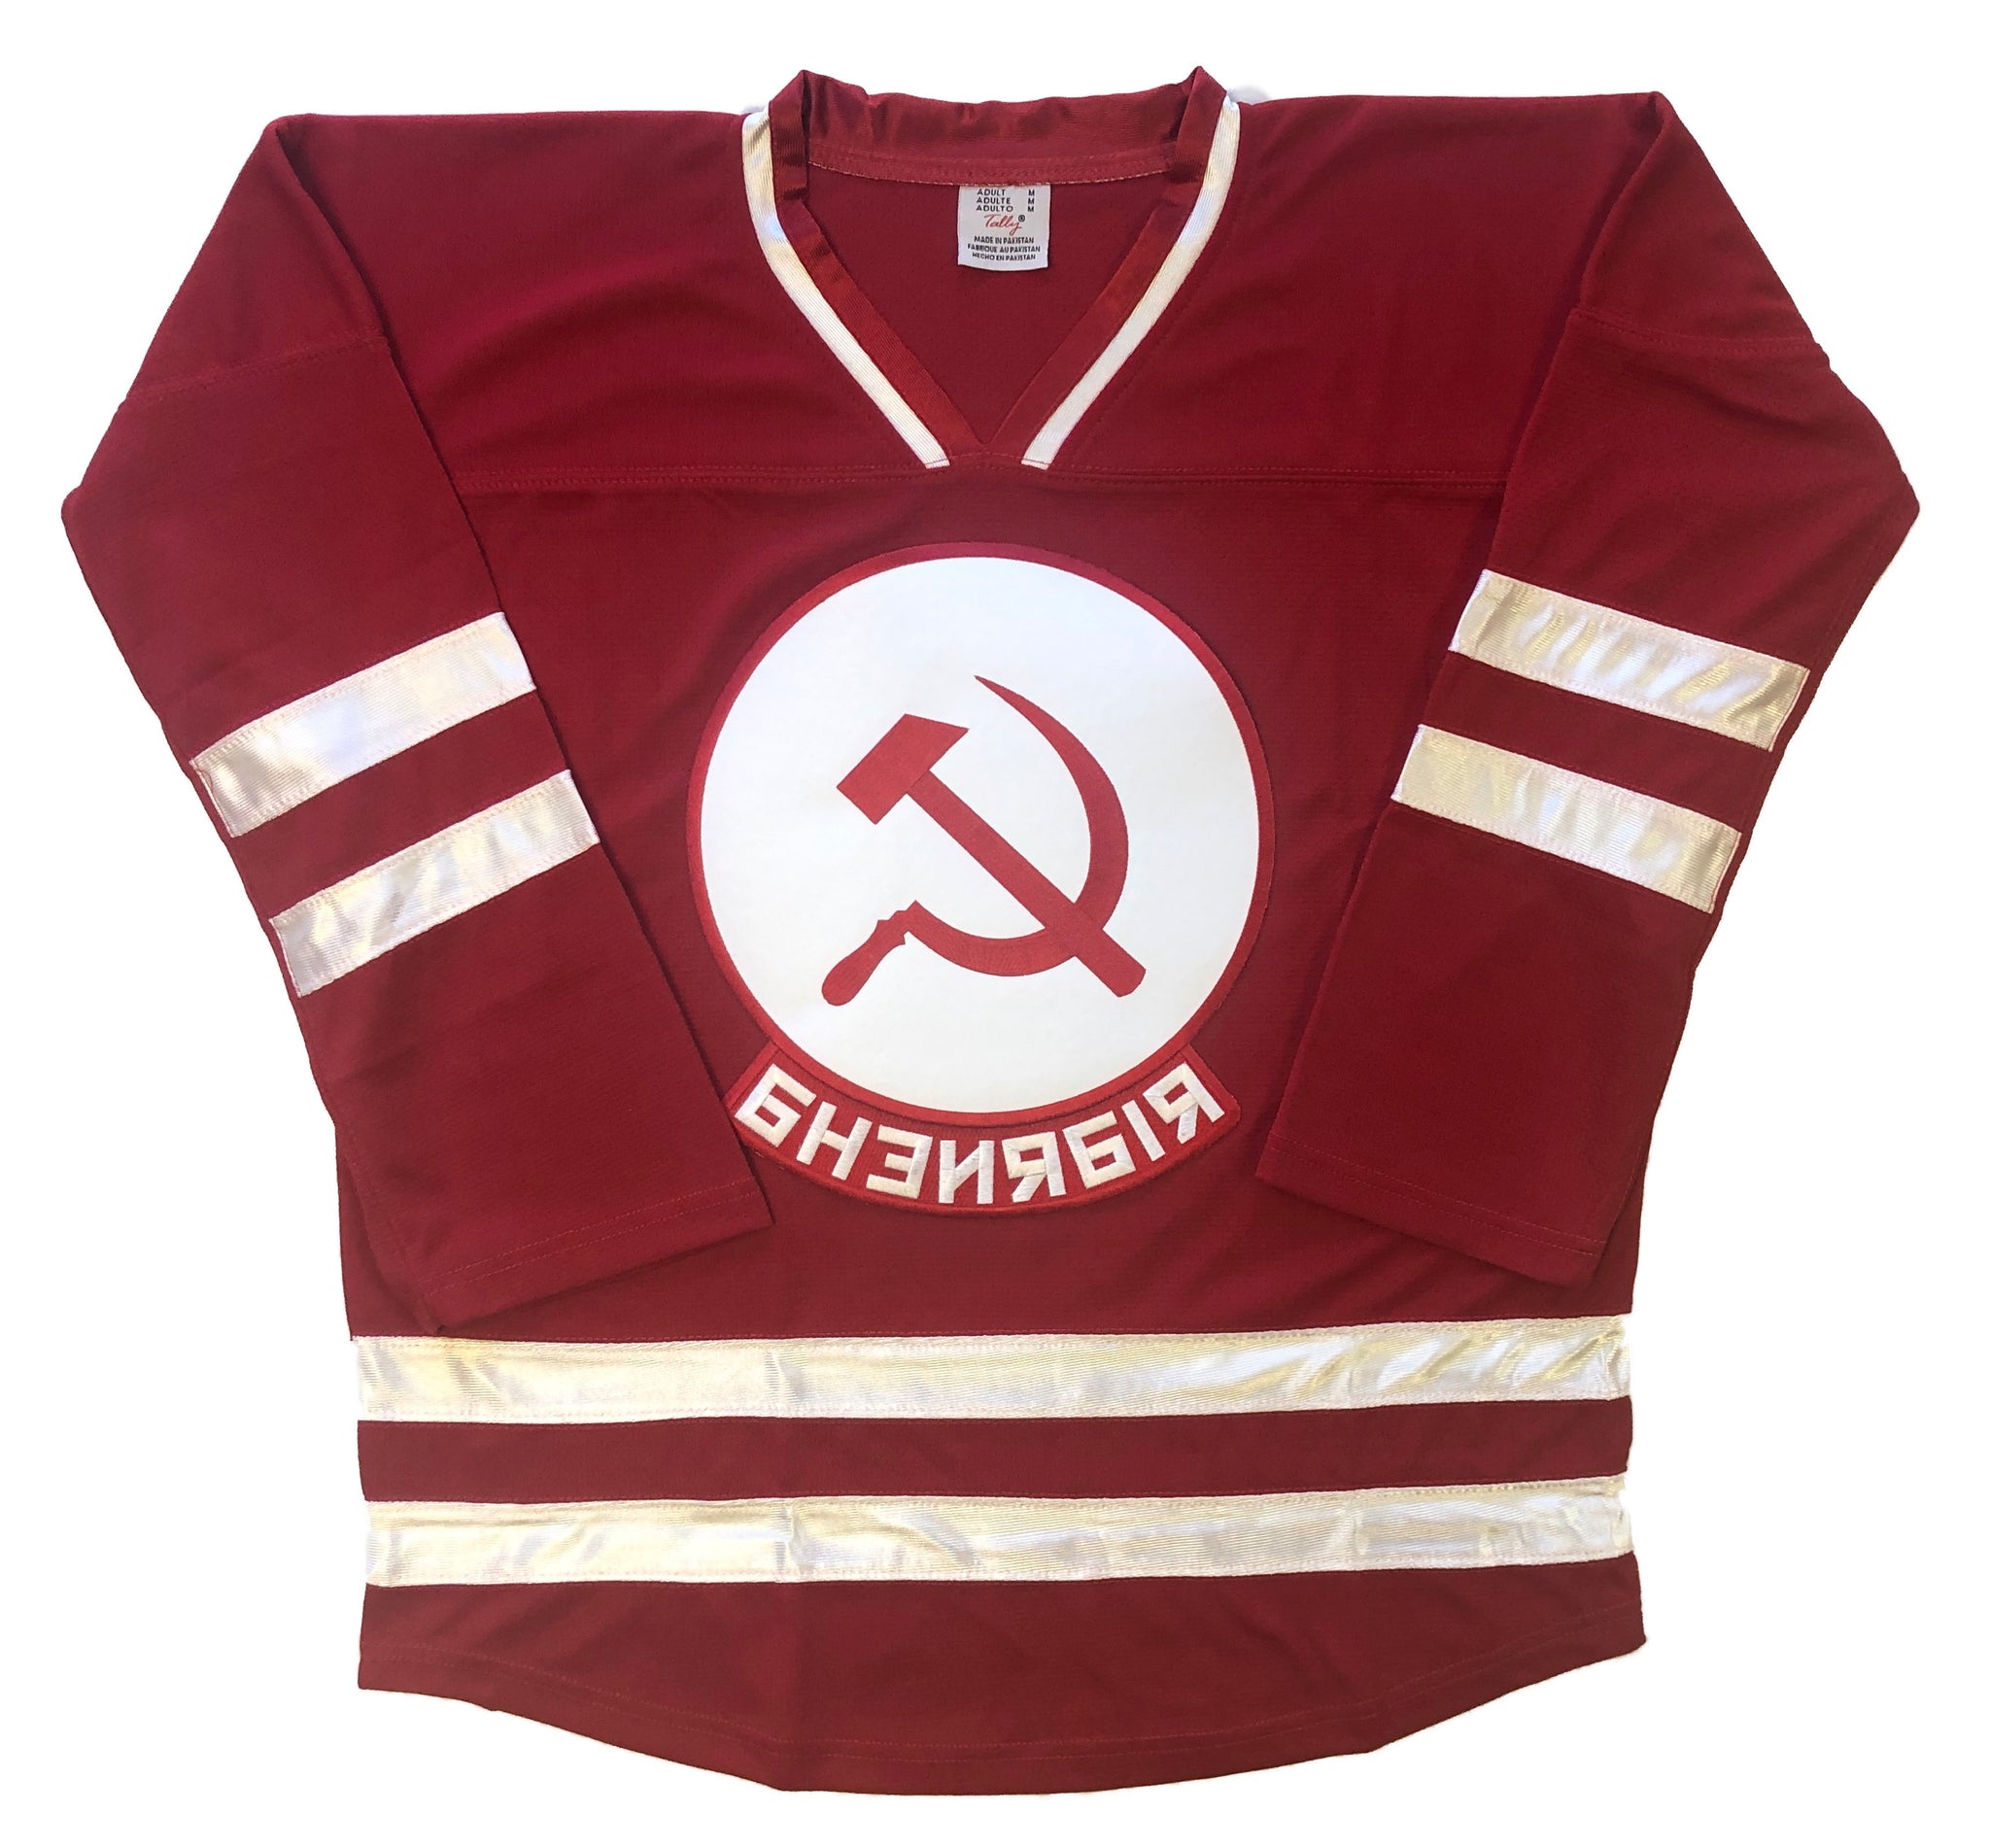 Custom Hockey Jerseys with A Chiefs Twill Logo Adult Goalie Cut / (name and Sleeve Numbers) / Red